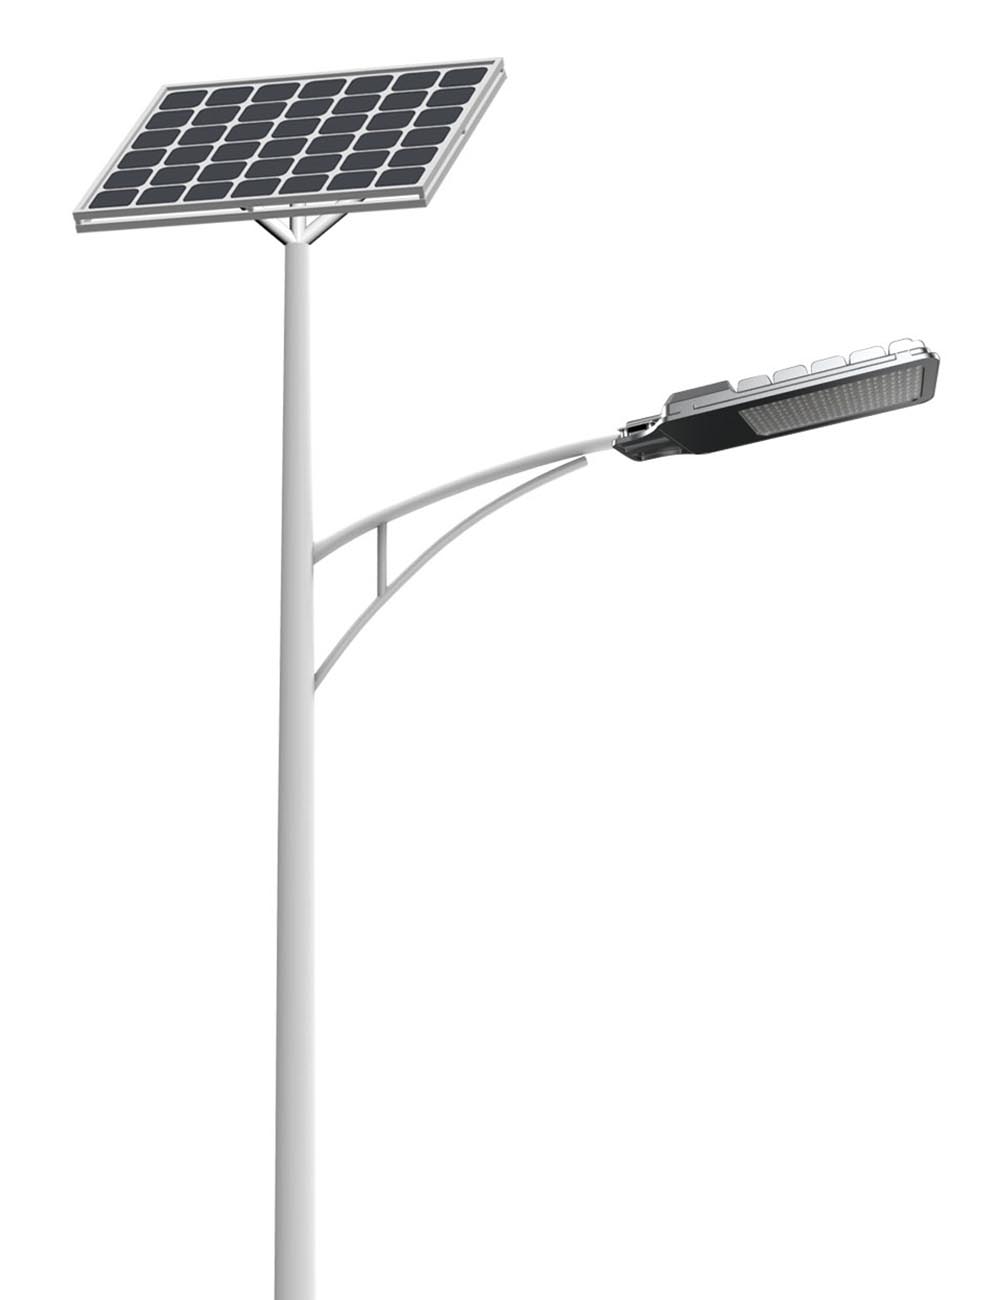 Solar Street Lights project in Chile